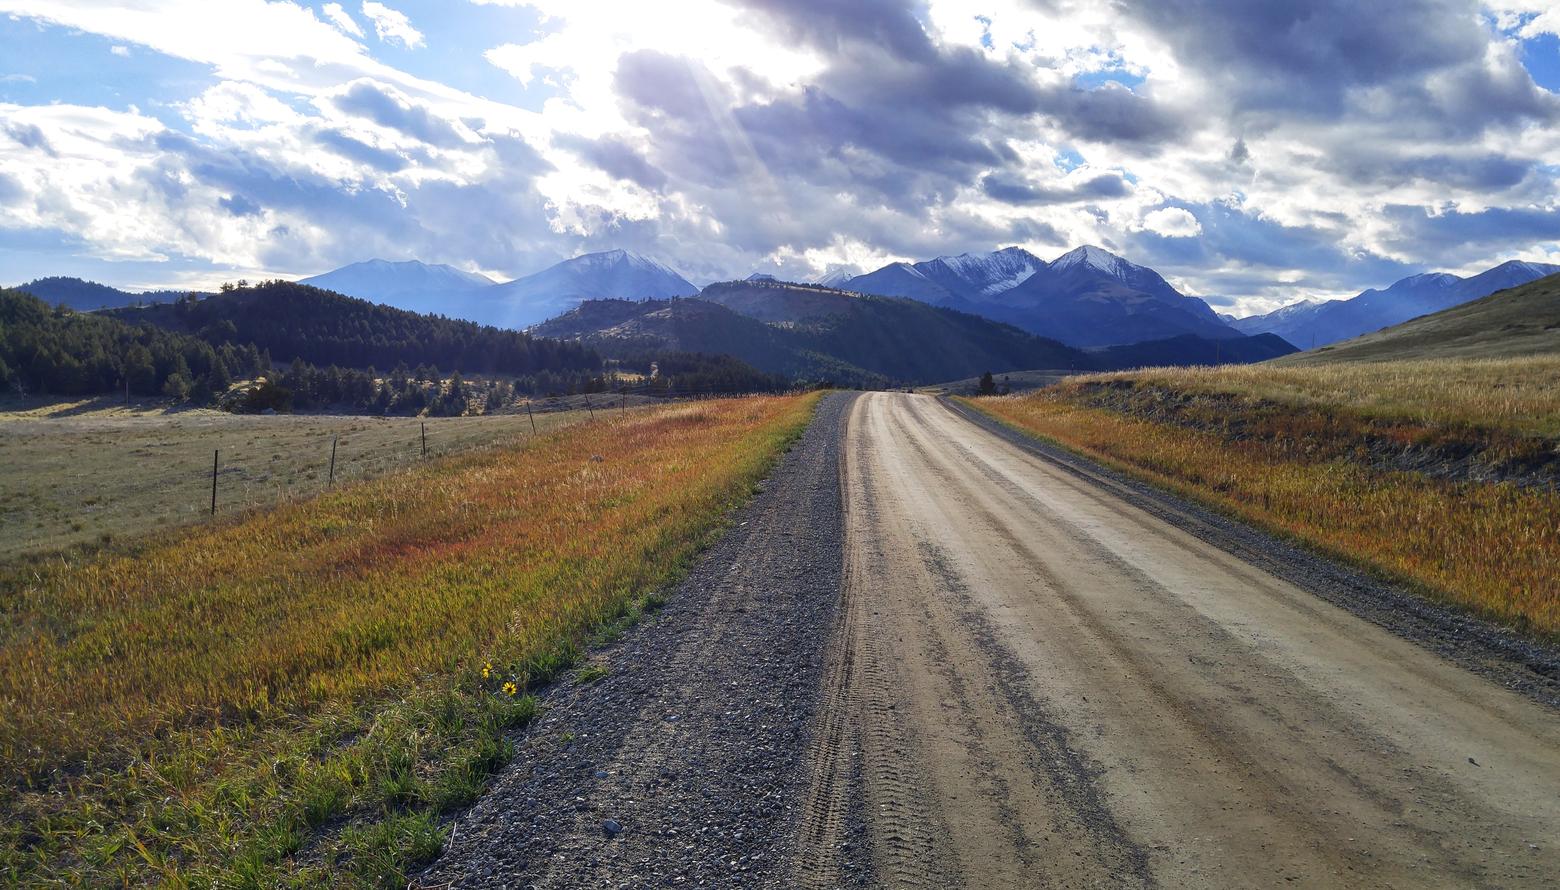 A rural road leading into the real Crazy Mountains, also the backdrop for Elise Atchison's new novel which dives into the clash between newcomers, old timers and transformation of place. Photo: Shutterstock ID 538283356/Justin Ridgeway